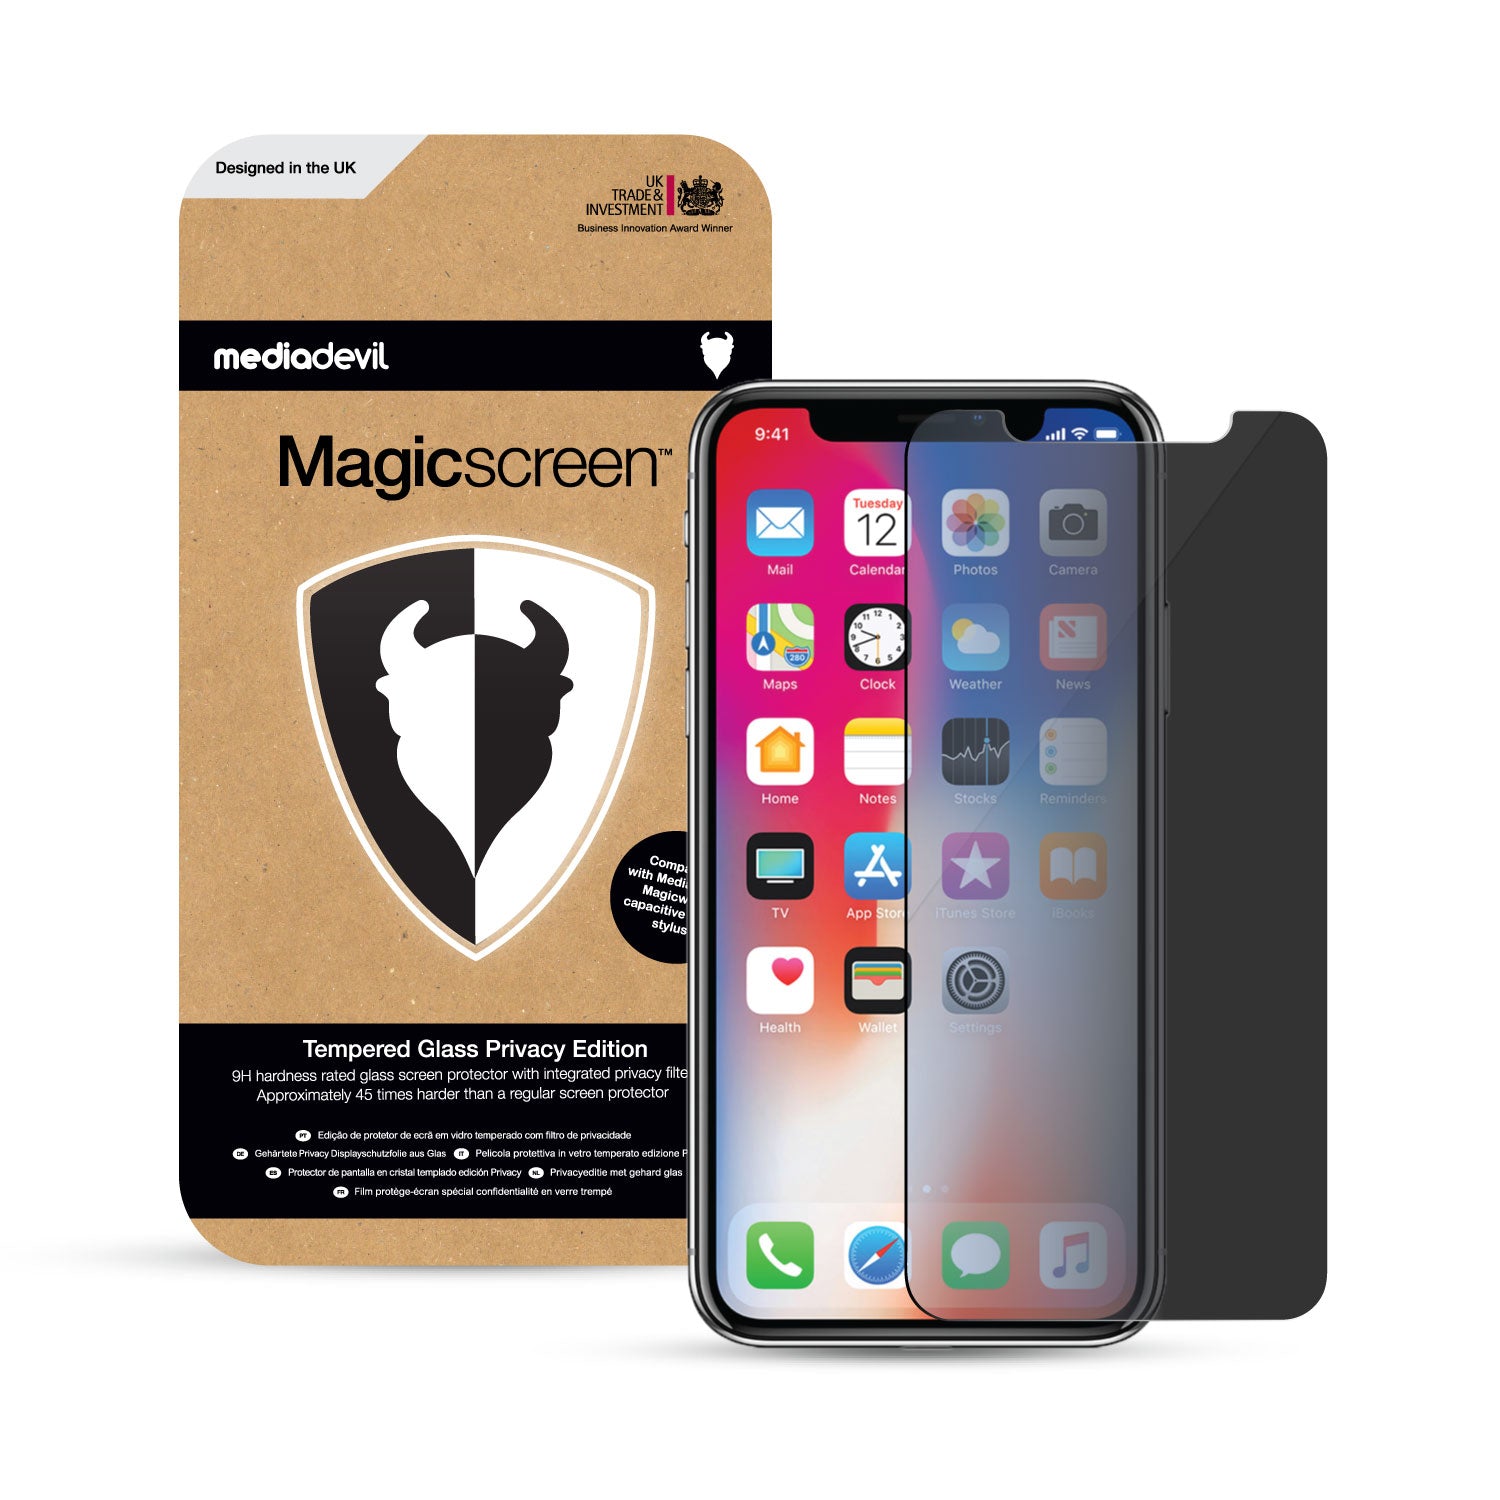 iPhone 11 Pro Max Phone Screen Protector